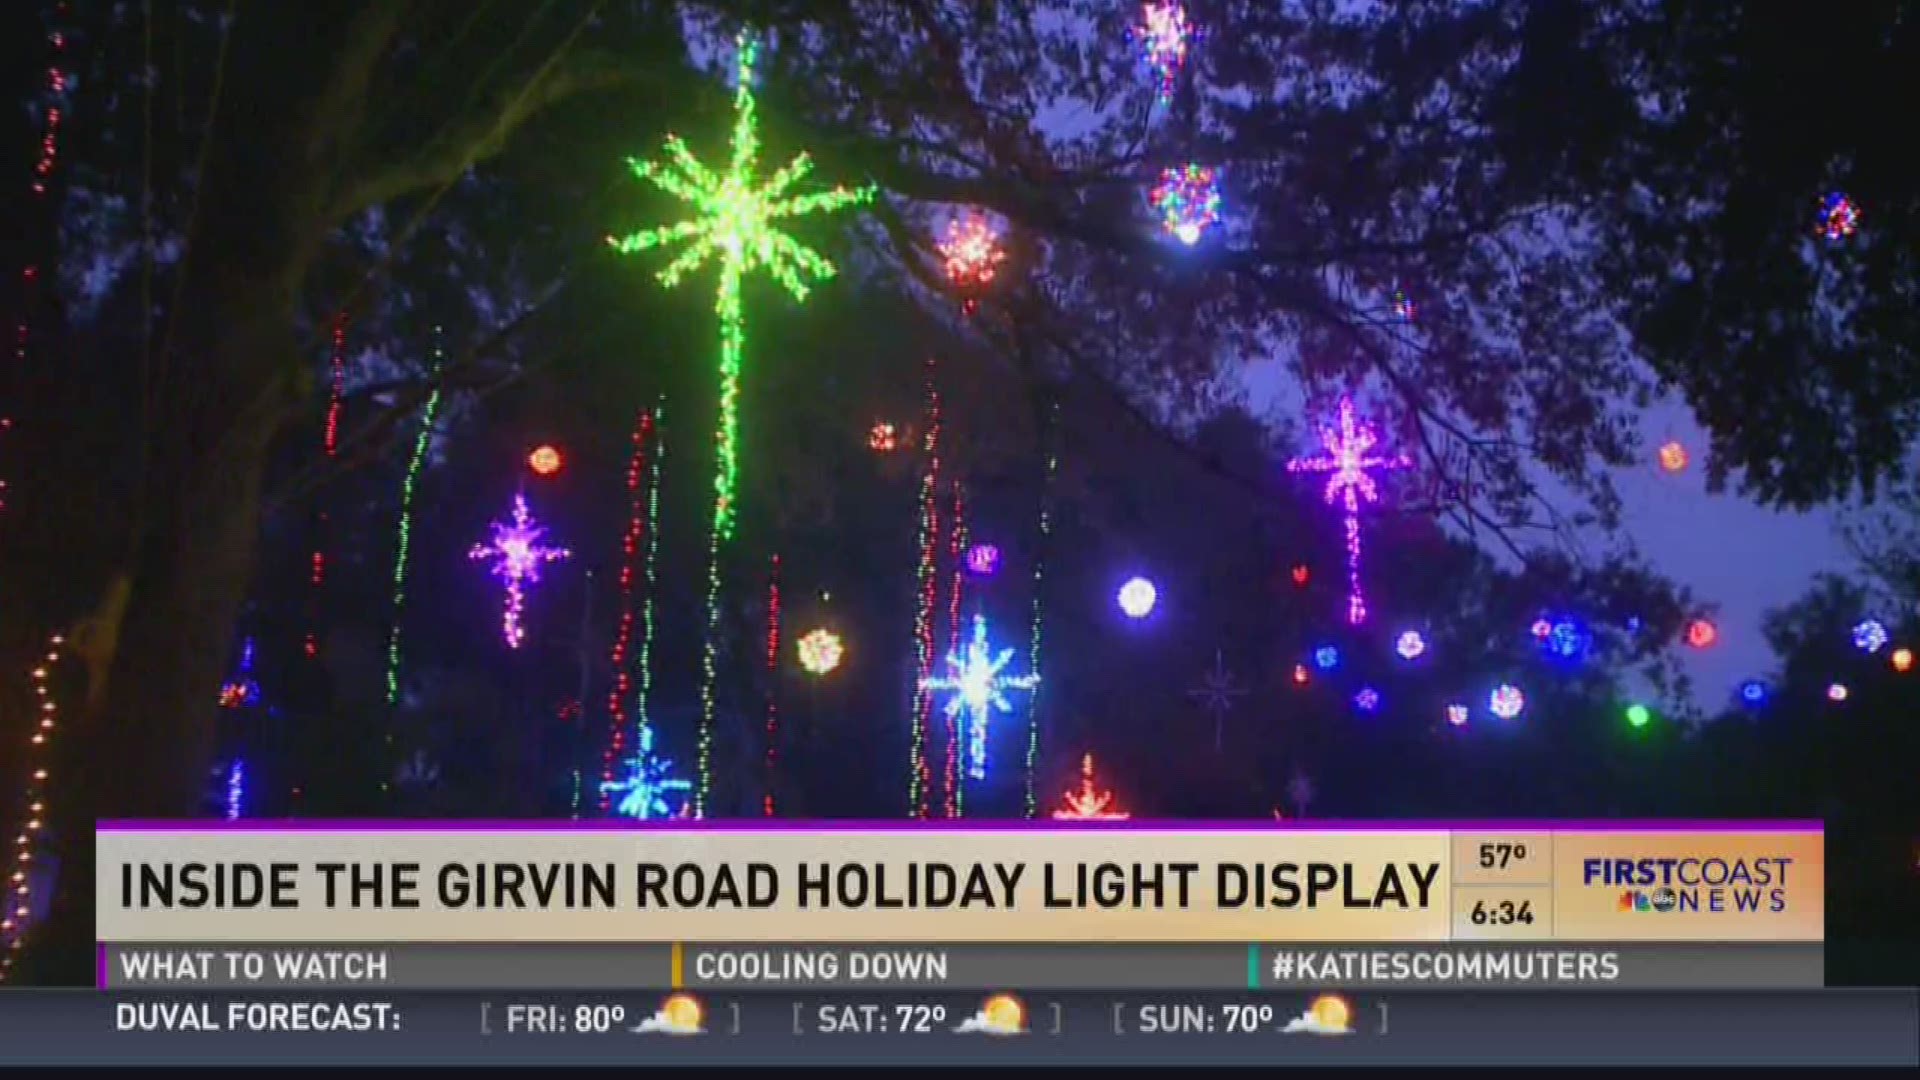 Inside the Girvin Road holiday light display